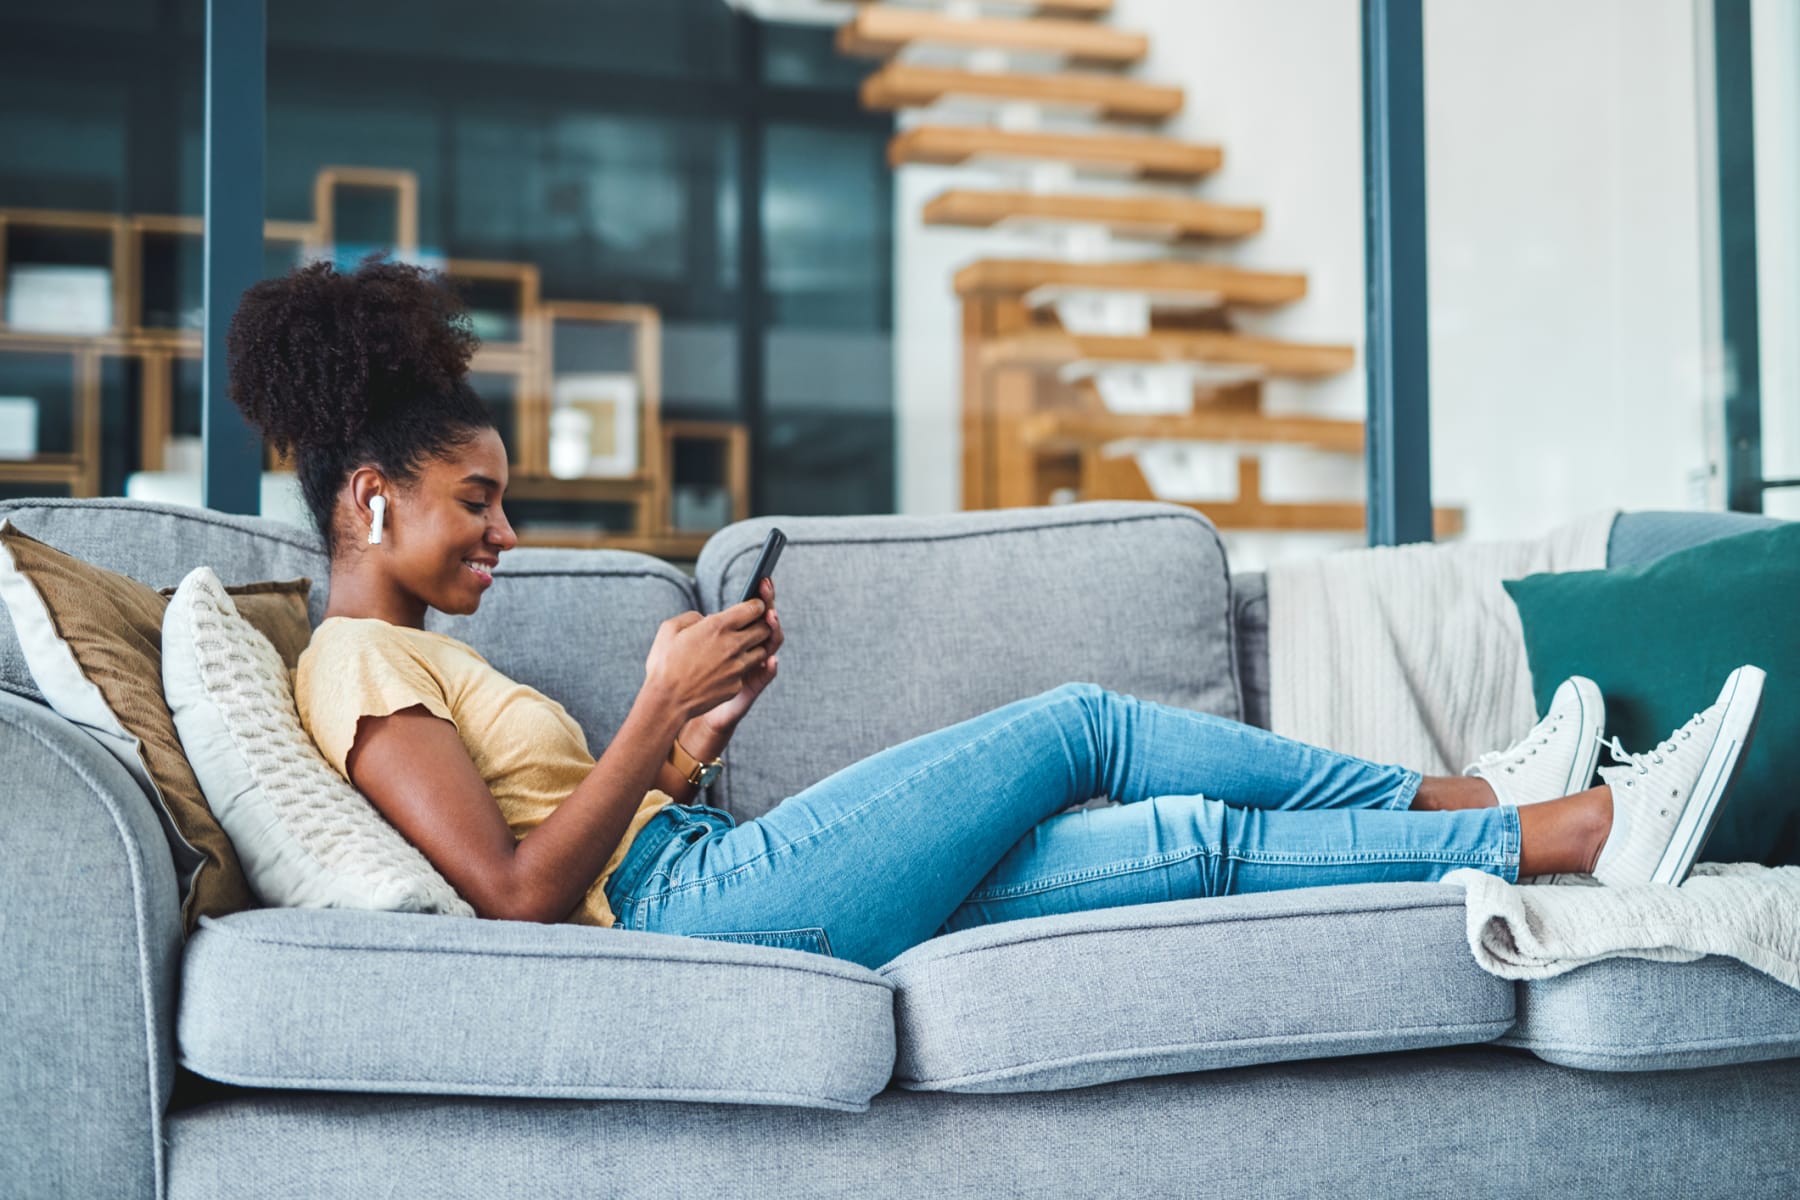 Young woman uses smartphone and wireless earbuds on sofa.